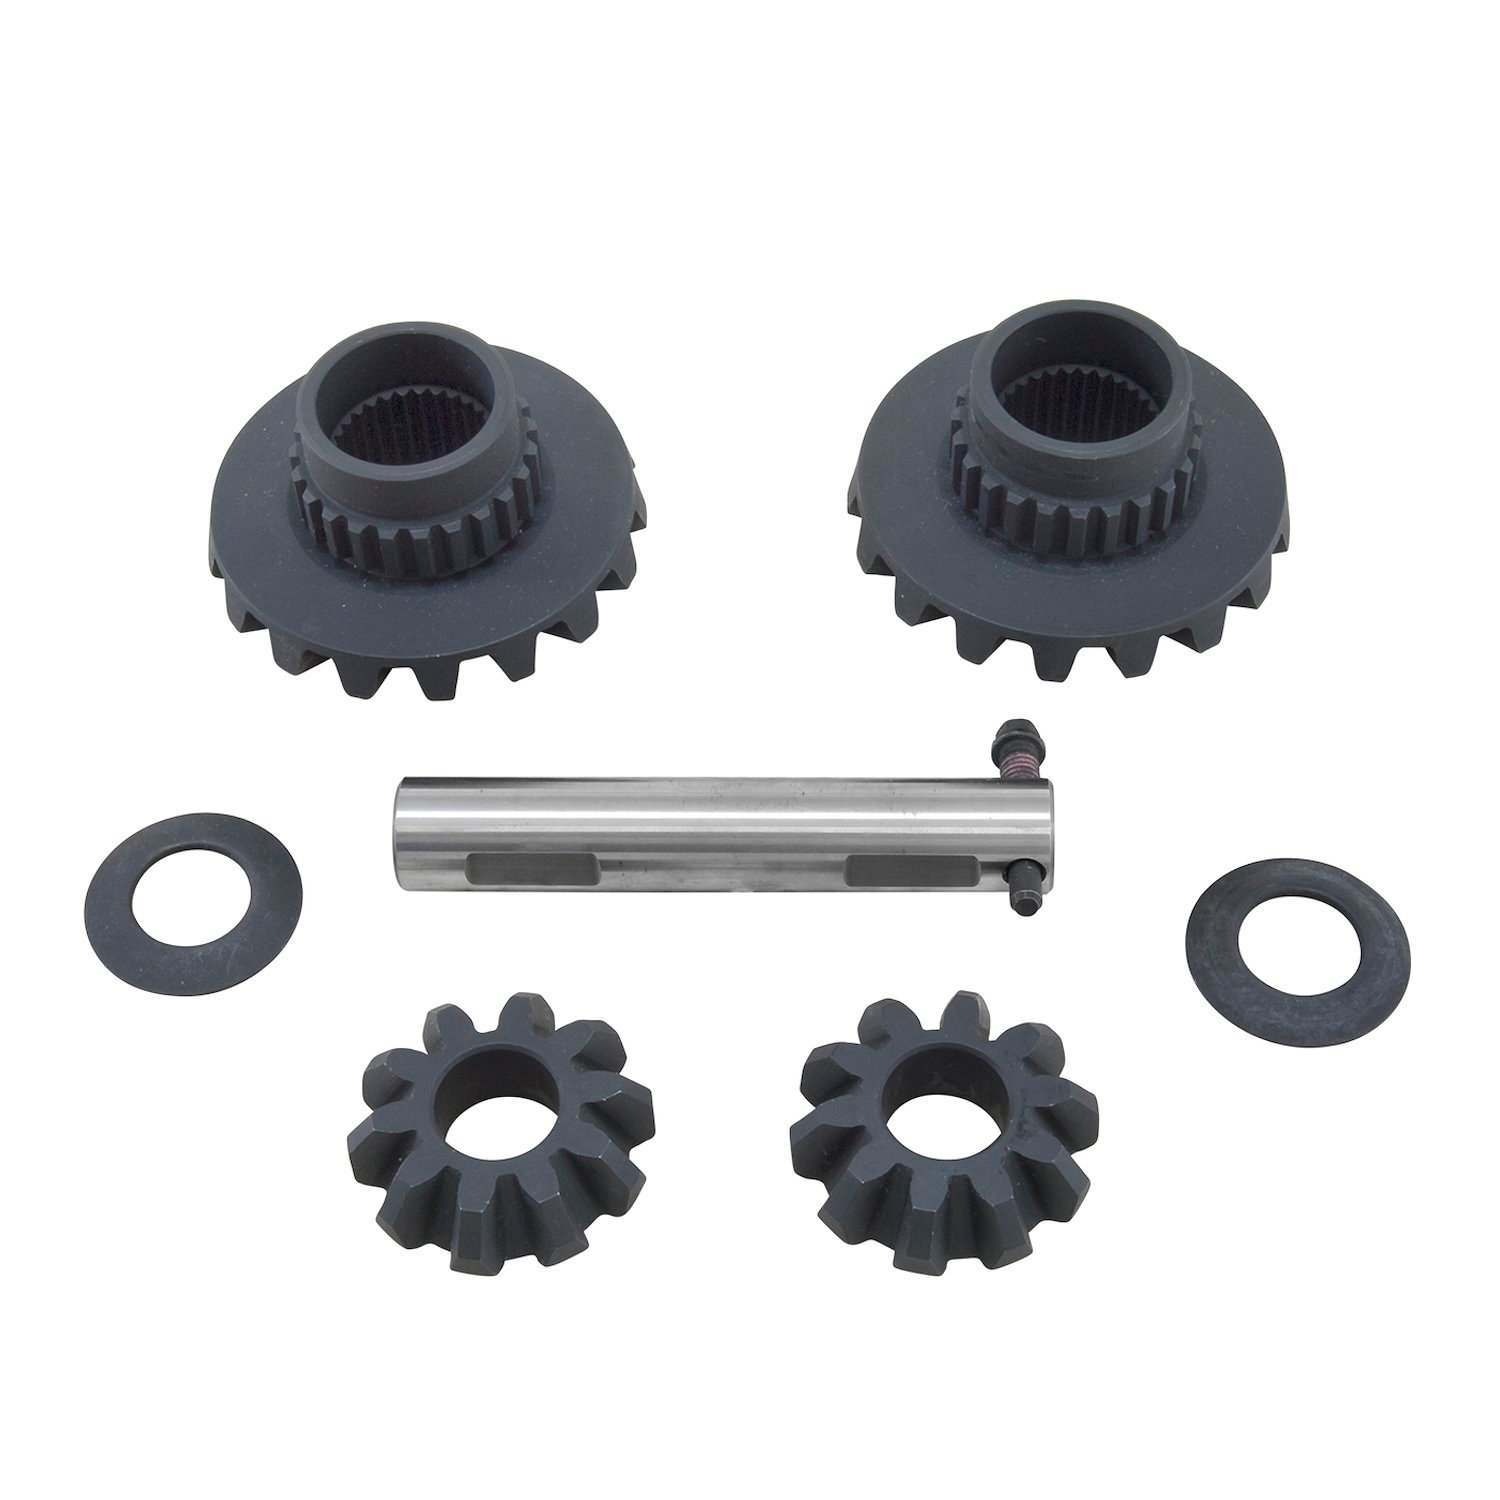 Spider Gear Kit Ford 8.8" with Yukon Dura Grip Positraction